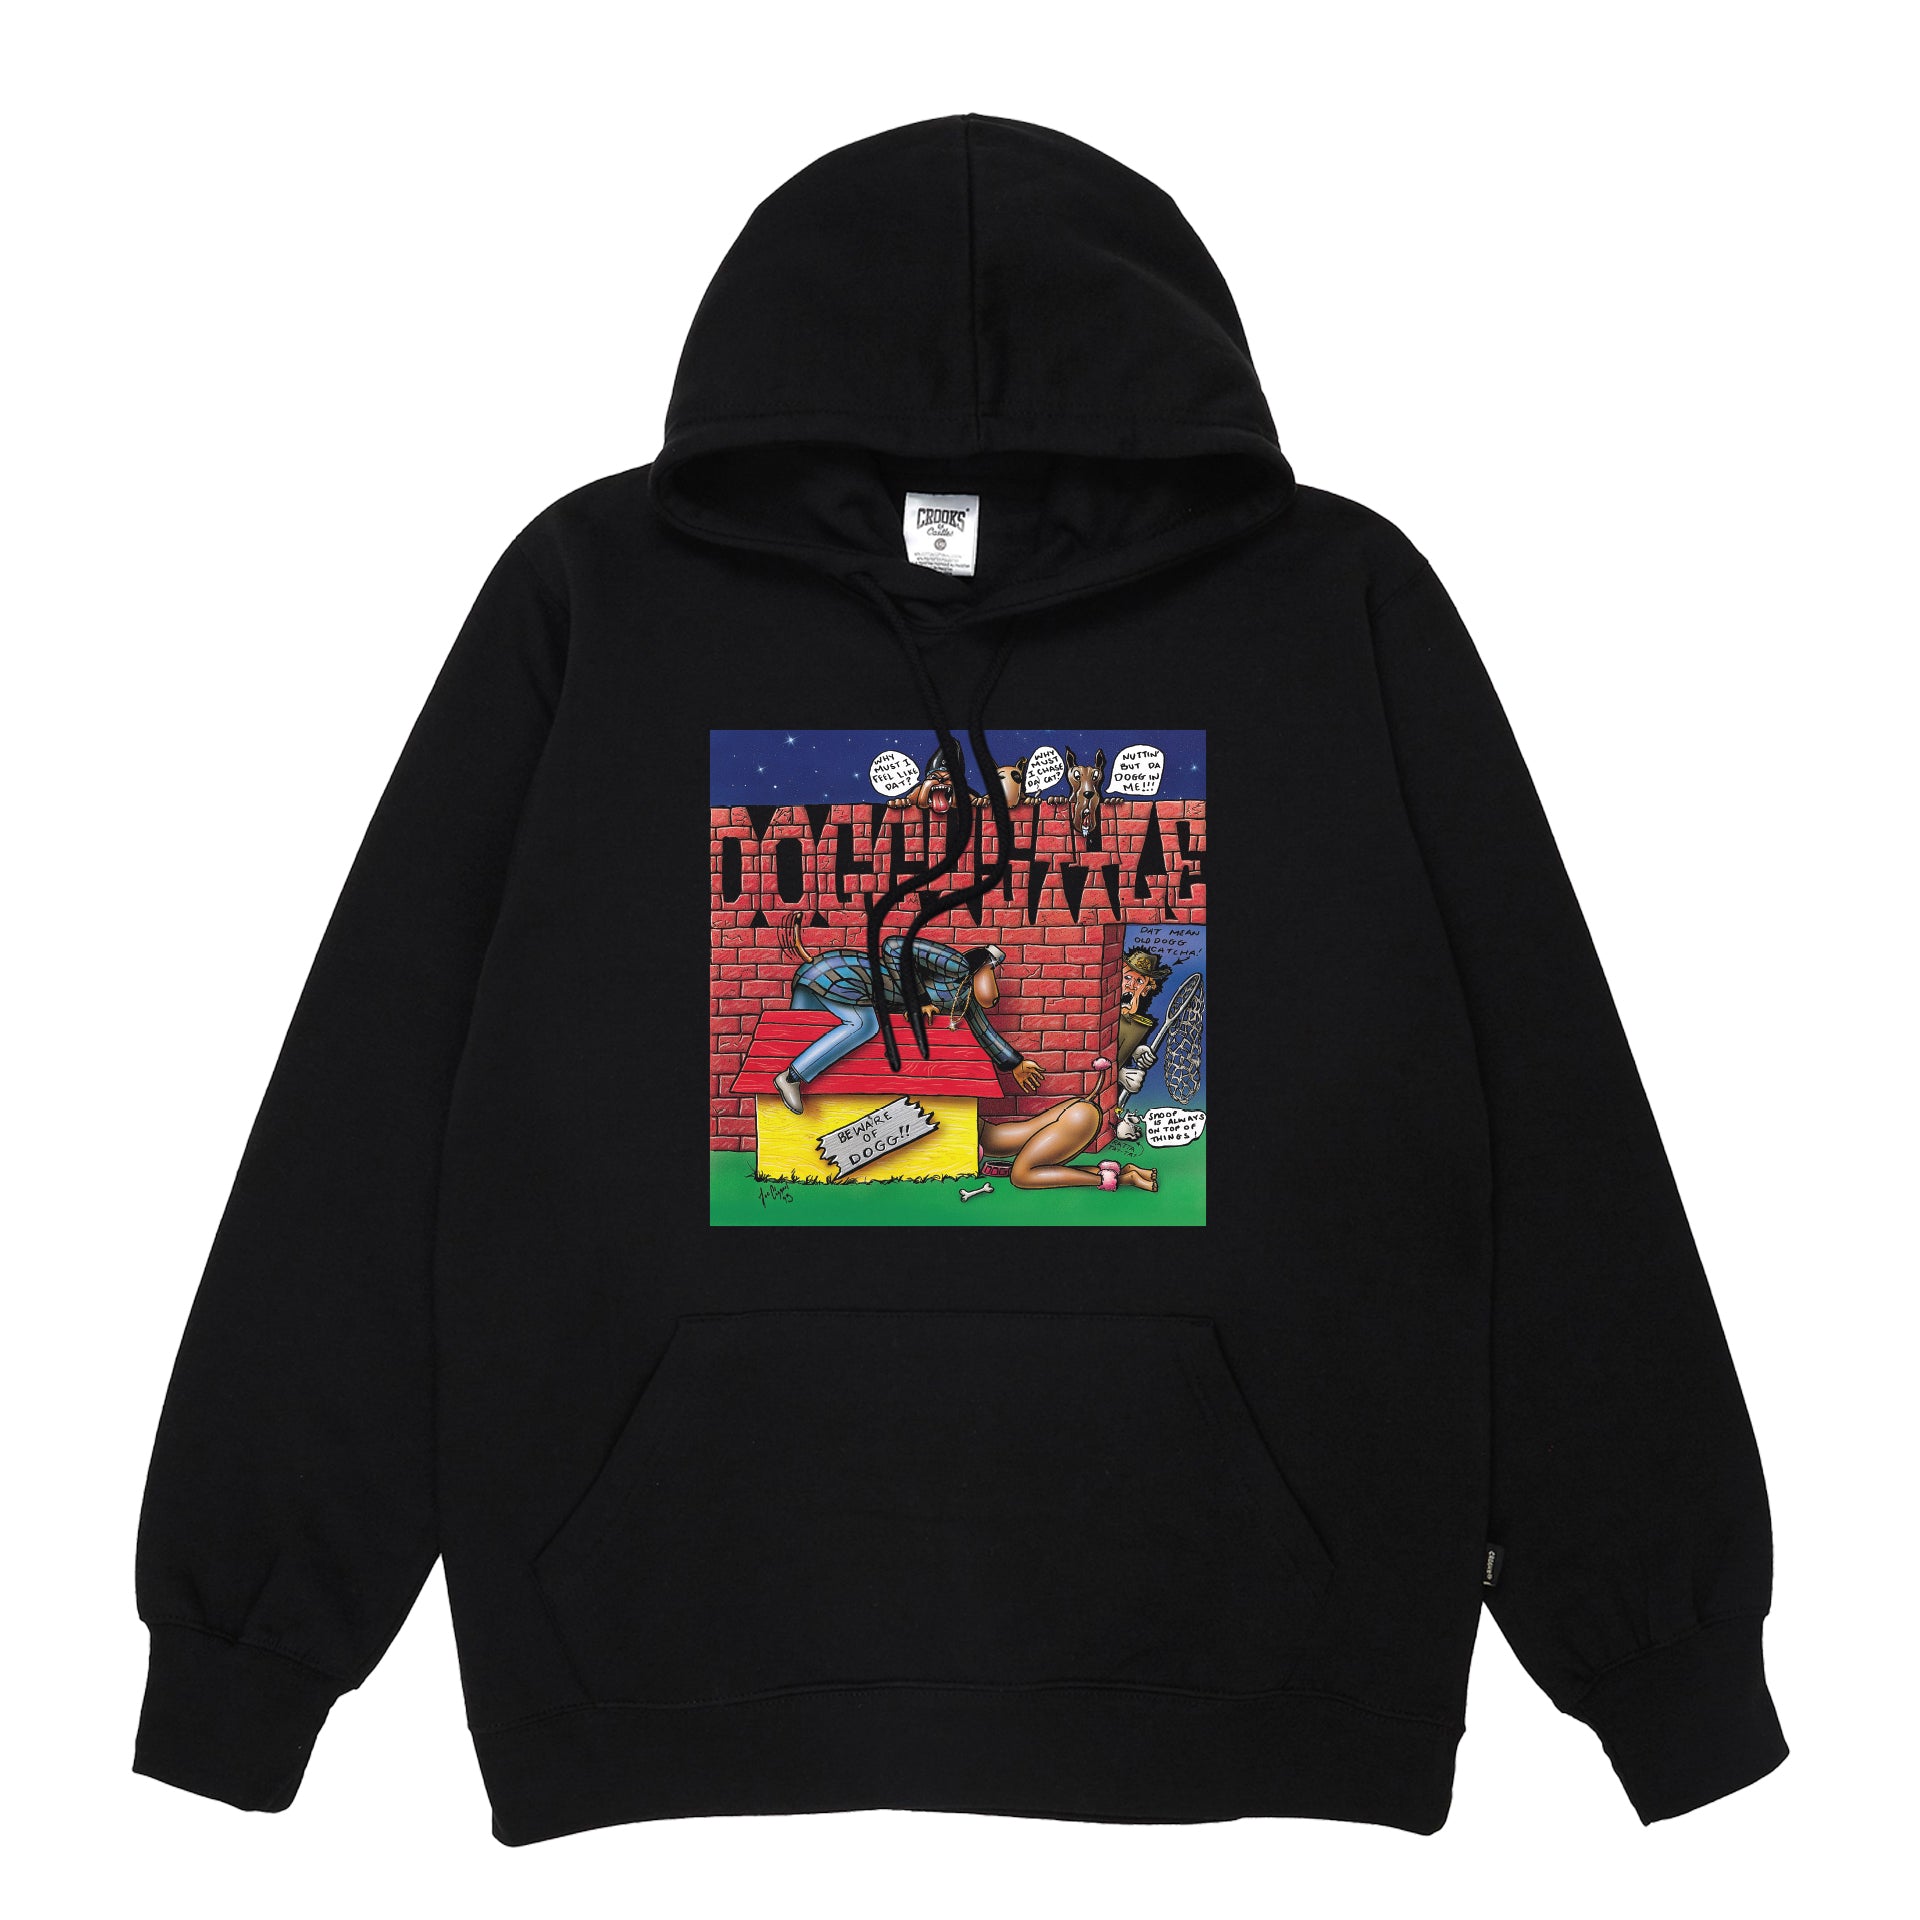 Doggystyle Album Cover Hoodie